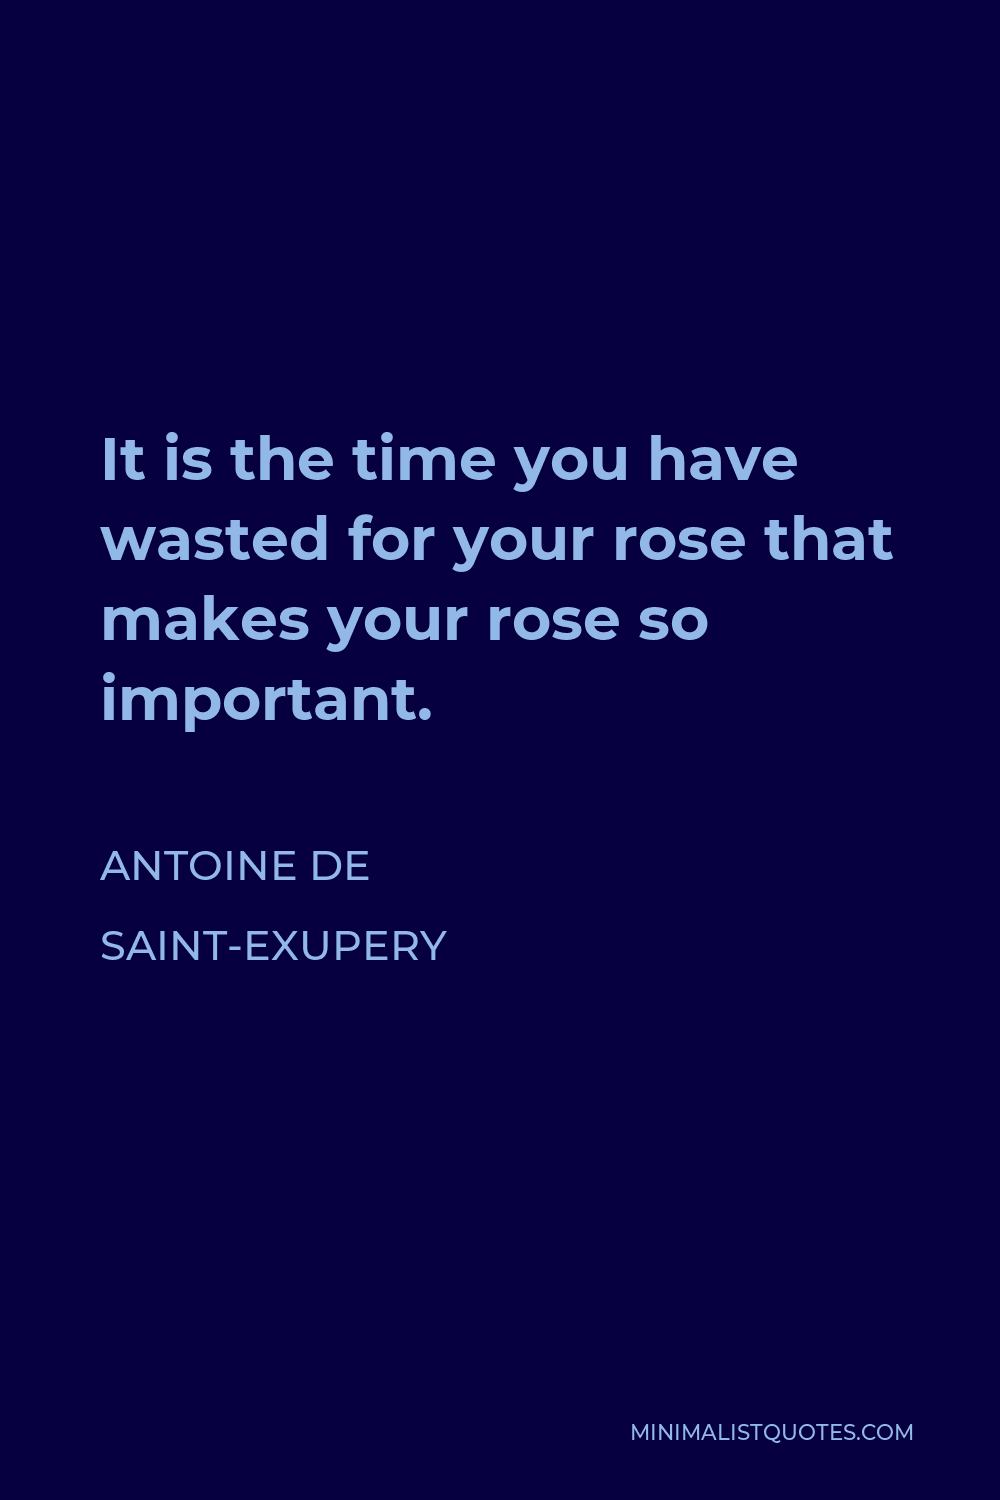 Antoine de Saint-Exupery Quote - It is the time you have wasted for your rose that makes your rose so important.